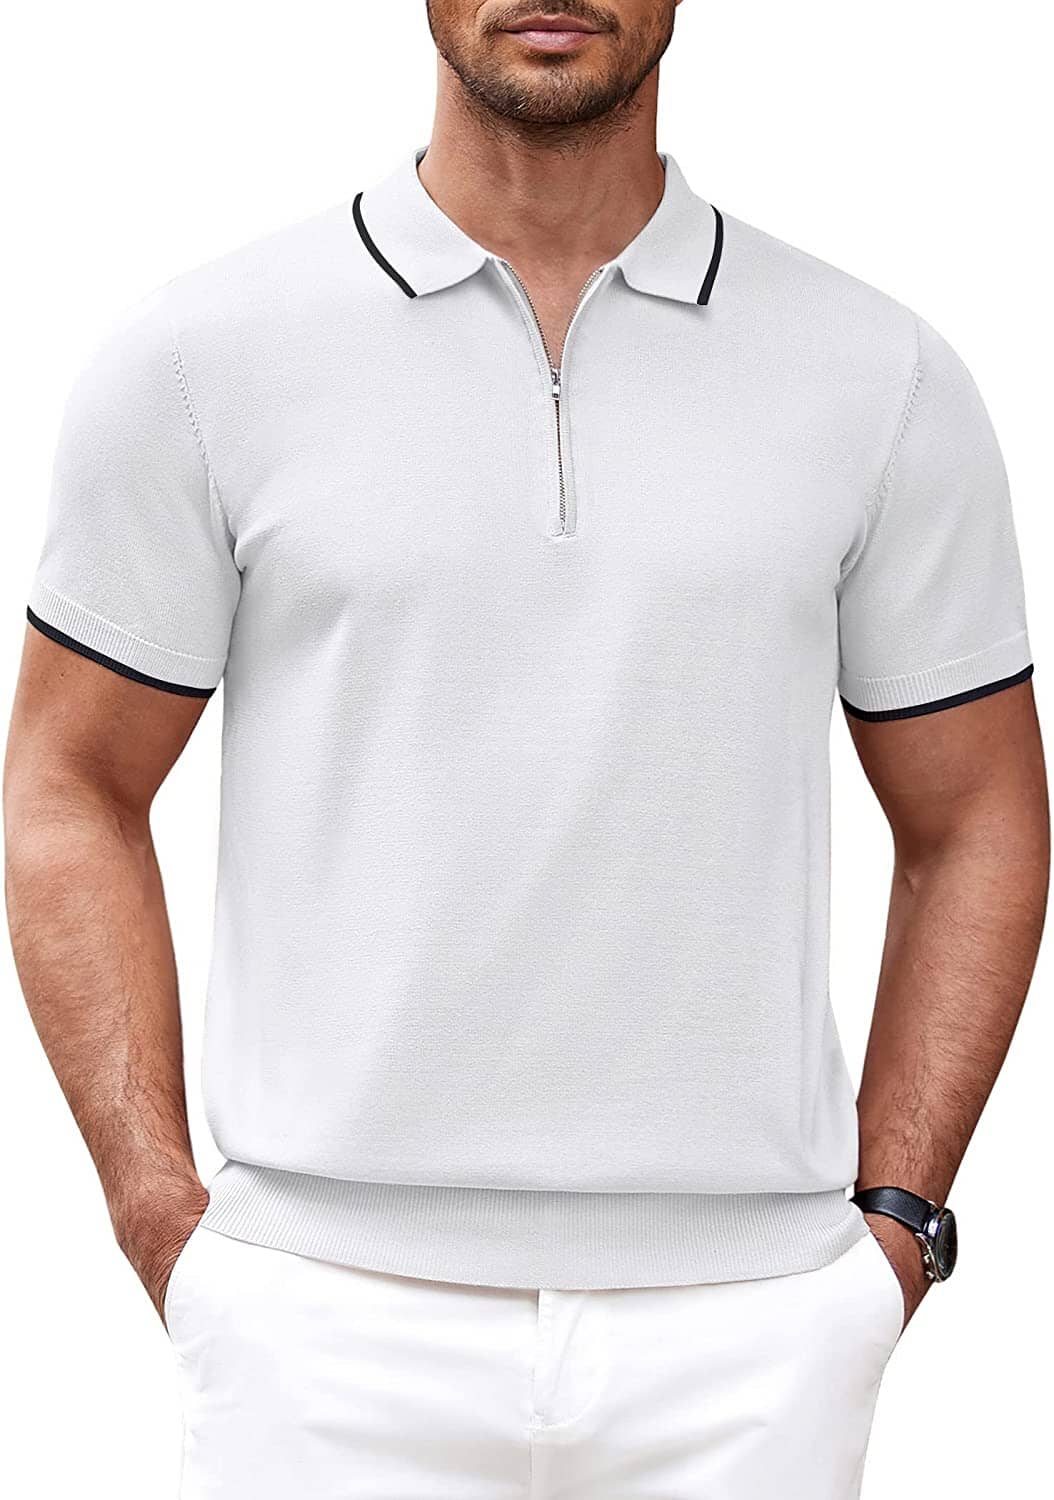 Classic Zipper Short Sleeve Polo Shirt (US Only) Polos COOFANDY Store White S 